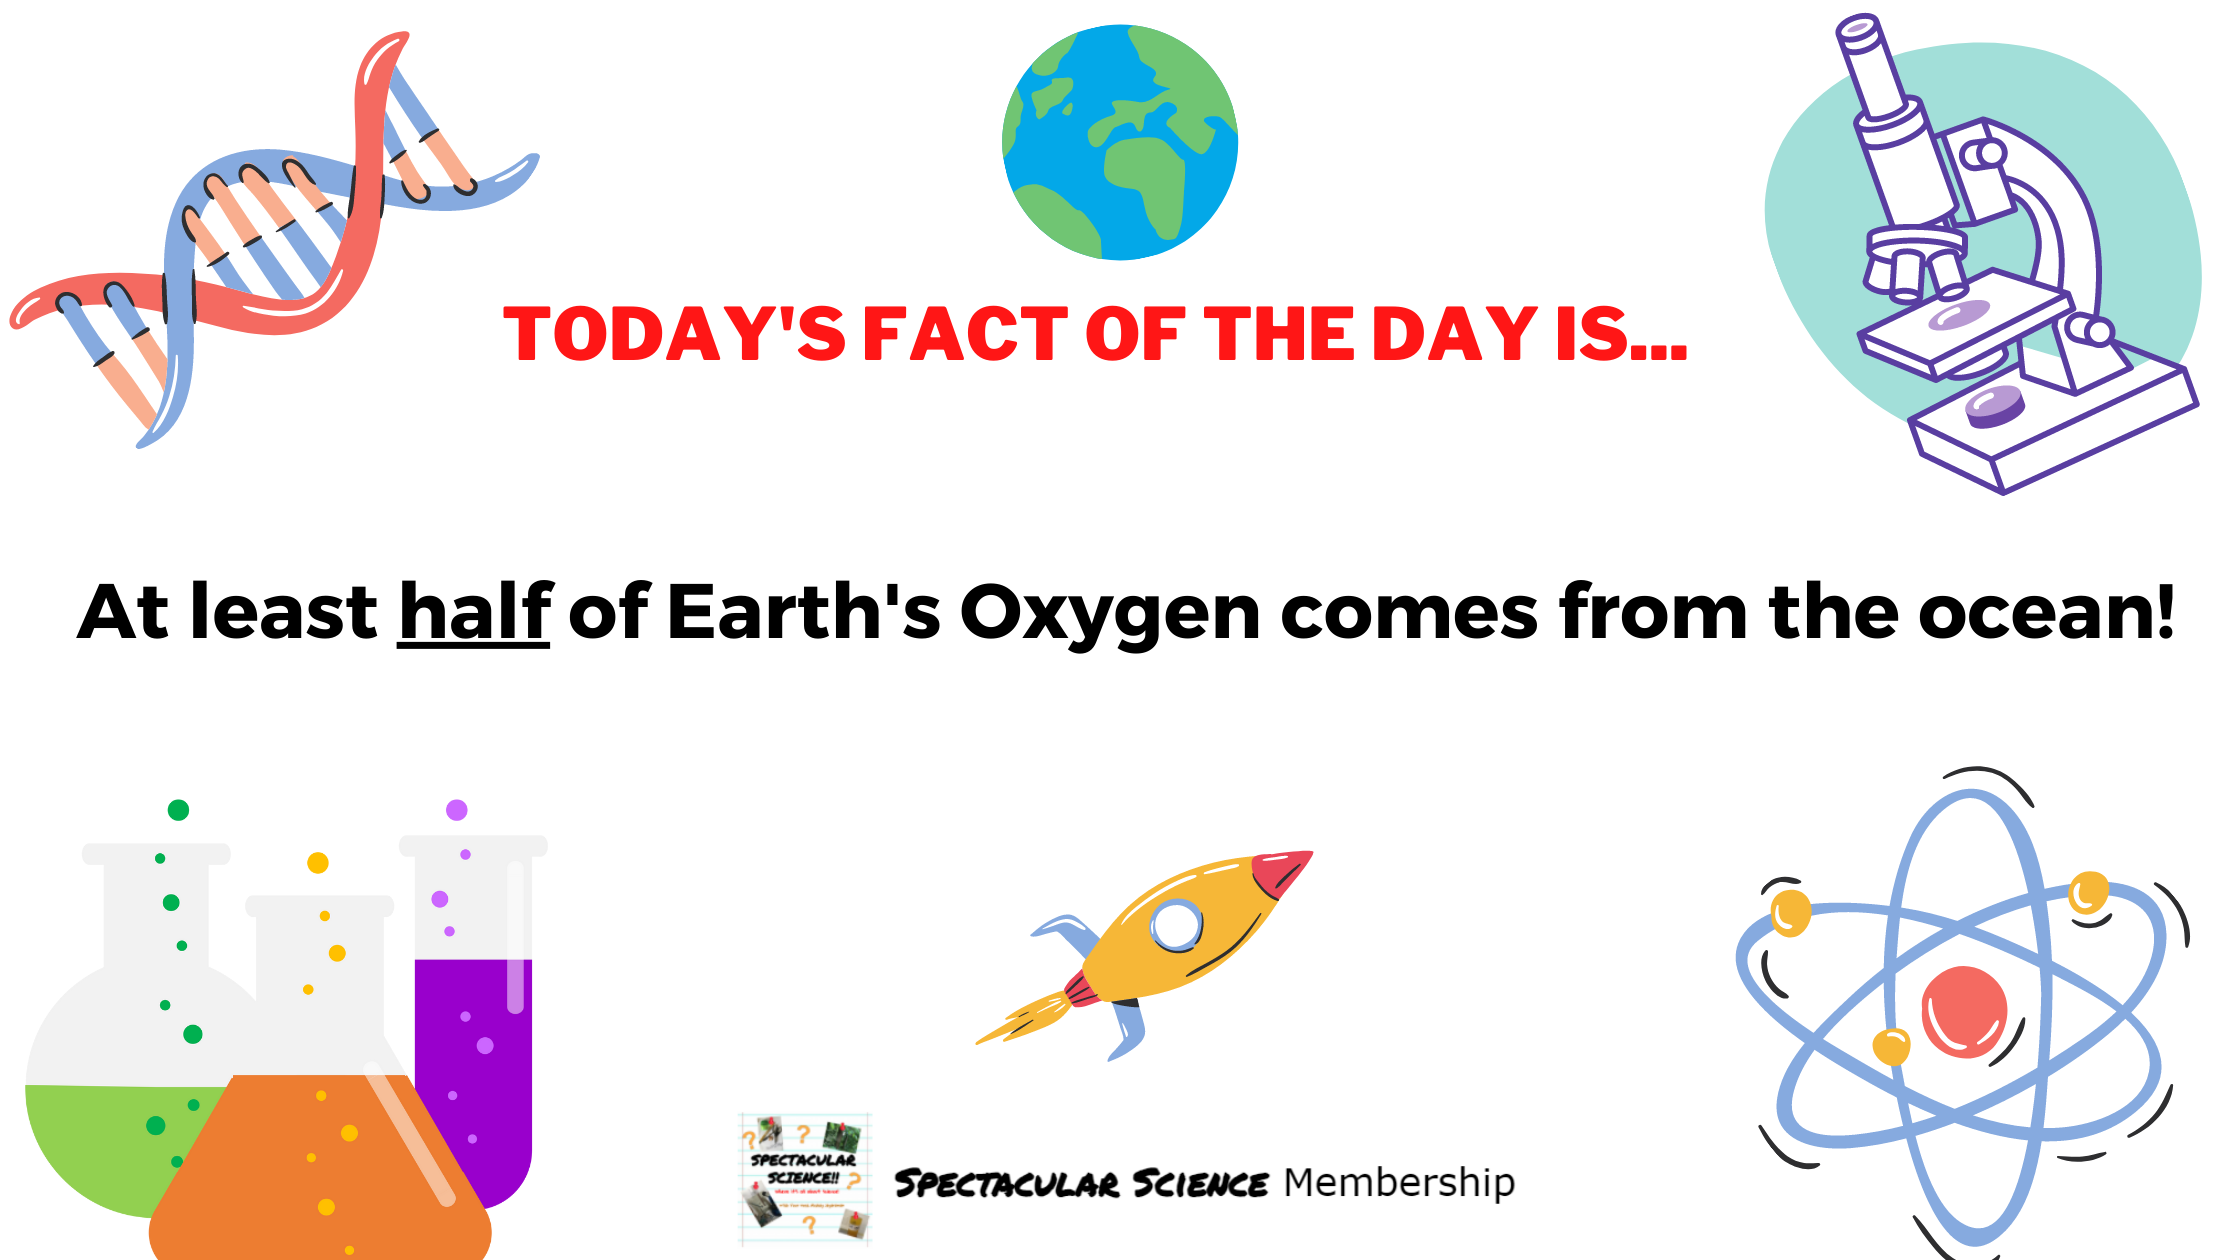 Fact of the Day Image Dec. 14th